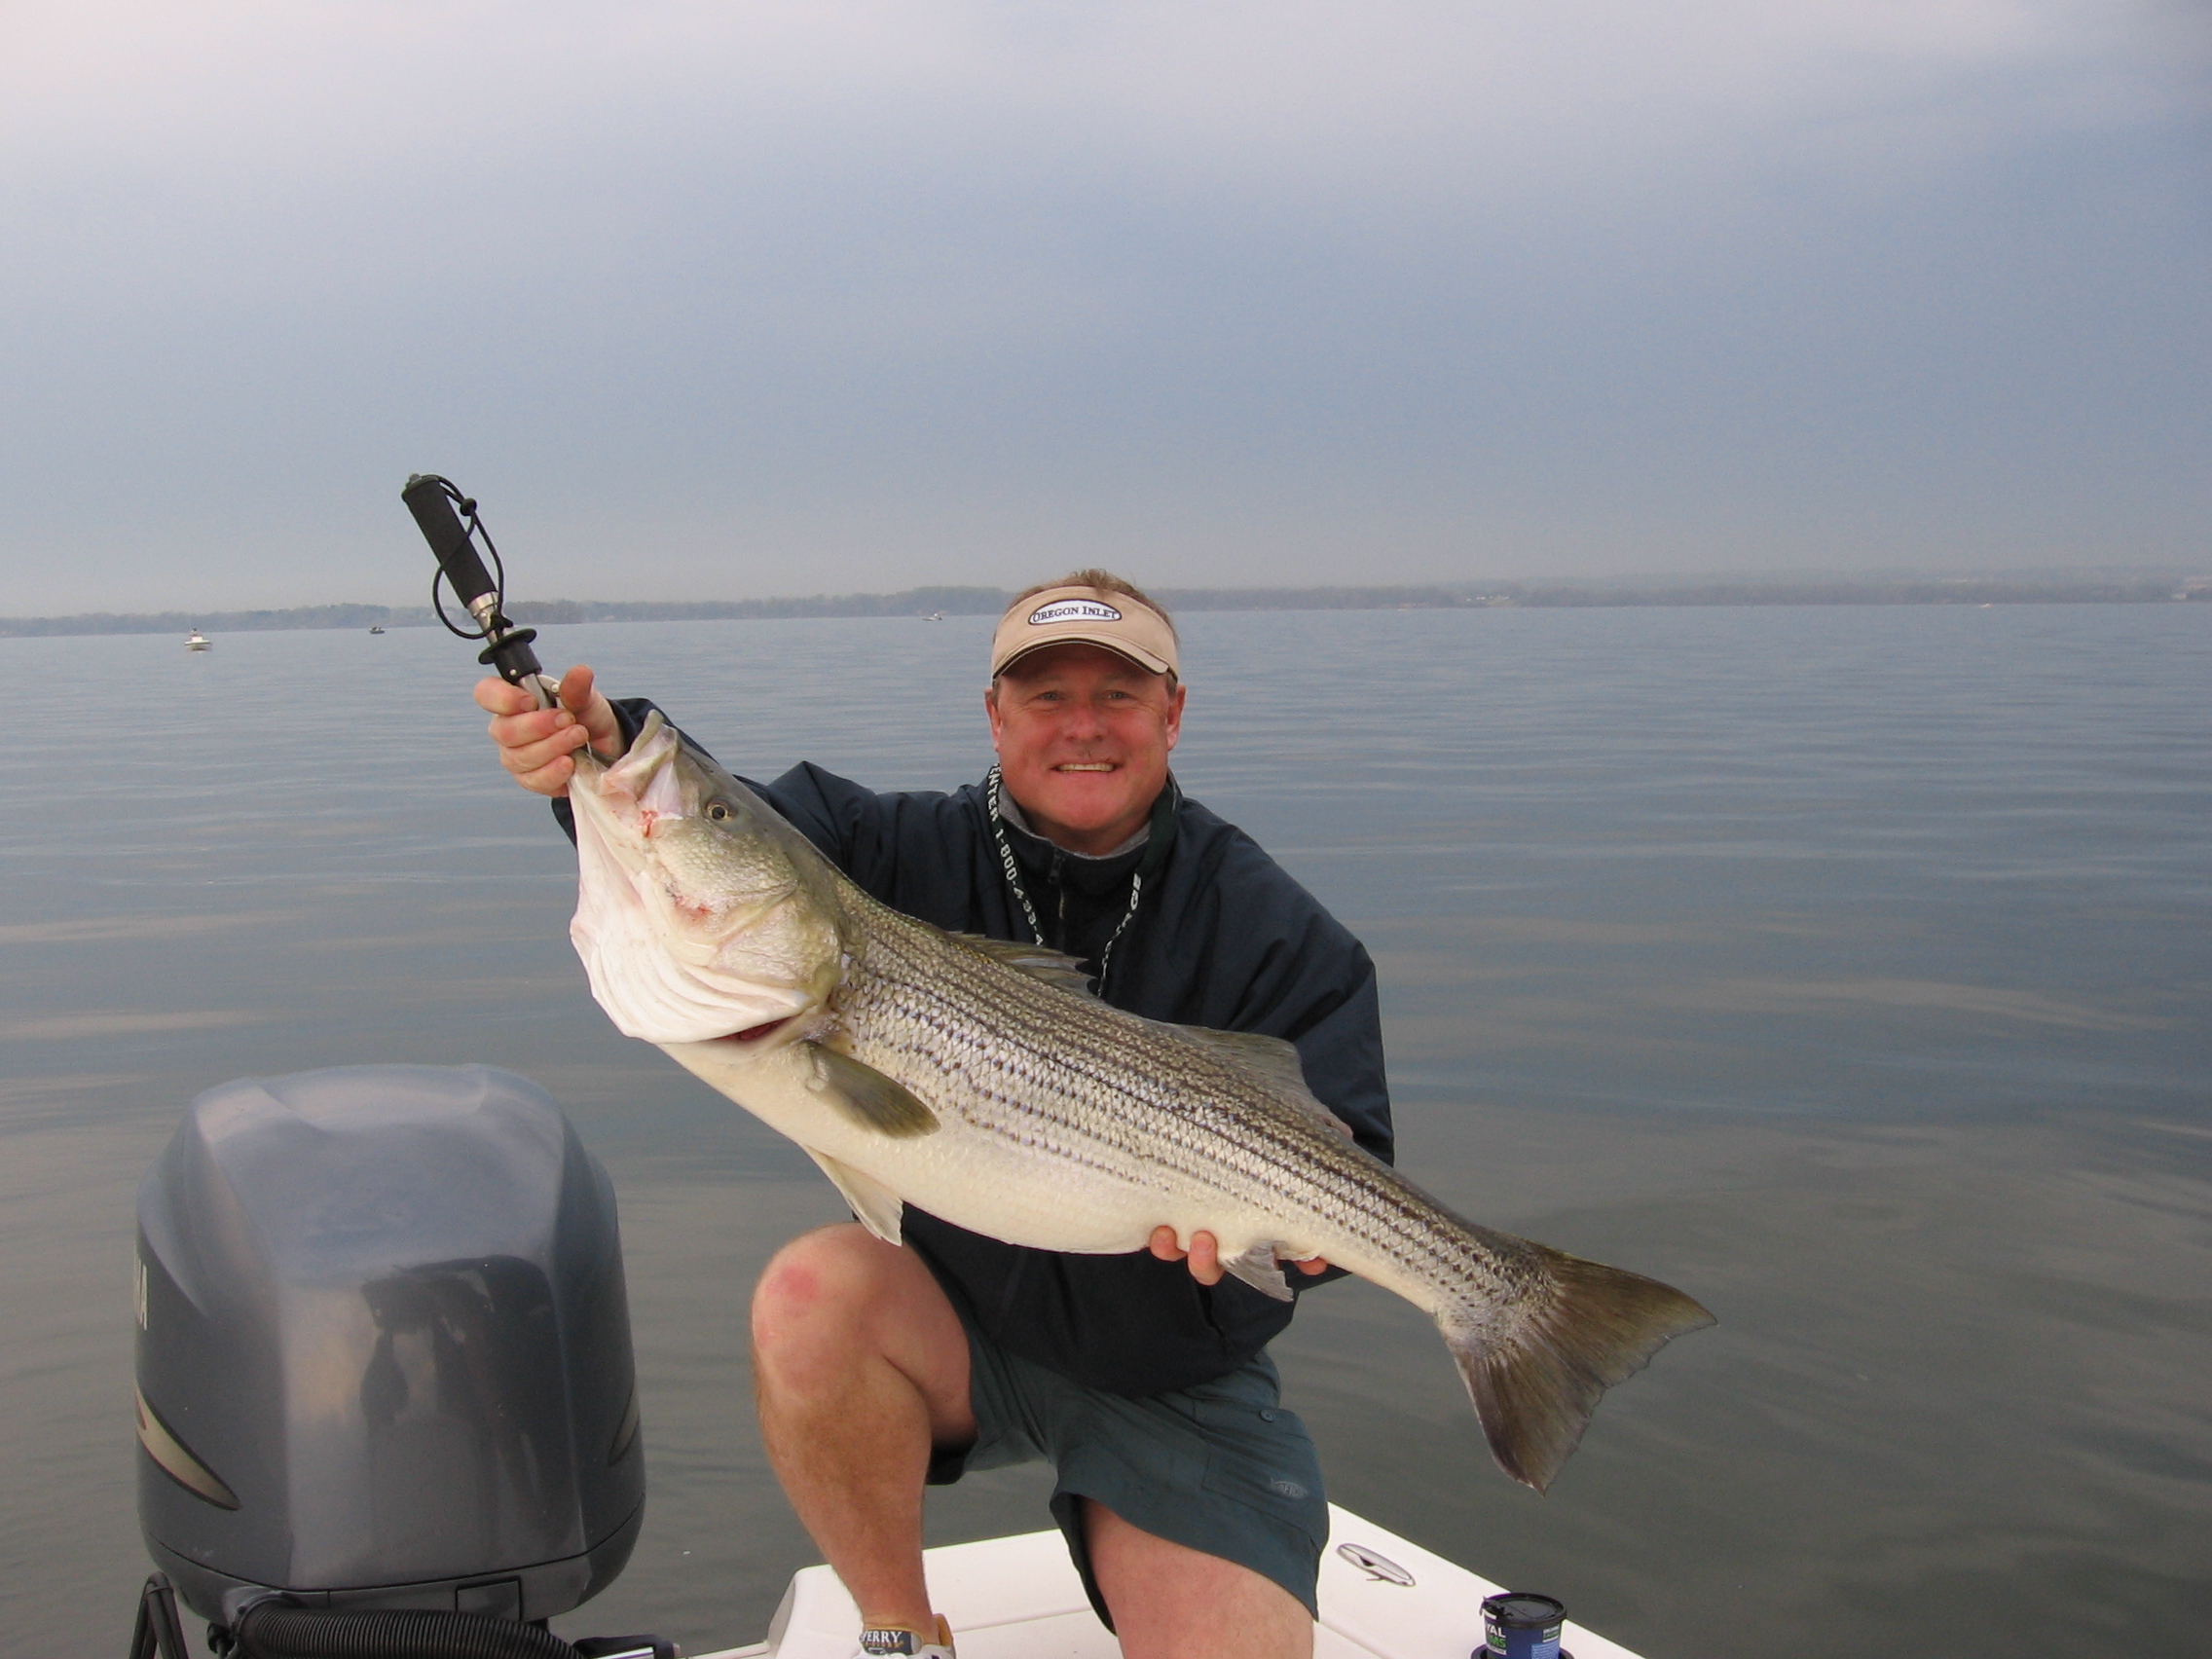 Light Tackle Fishing Patterns of The Chesapeake Bay: A Guide to Month by Month Pattern Development for Striped Bass (Chesapeake Trilogy: The